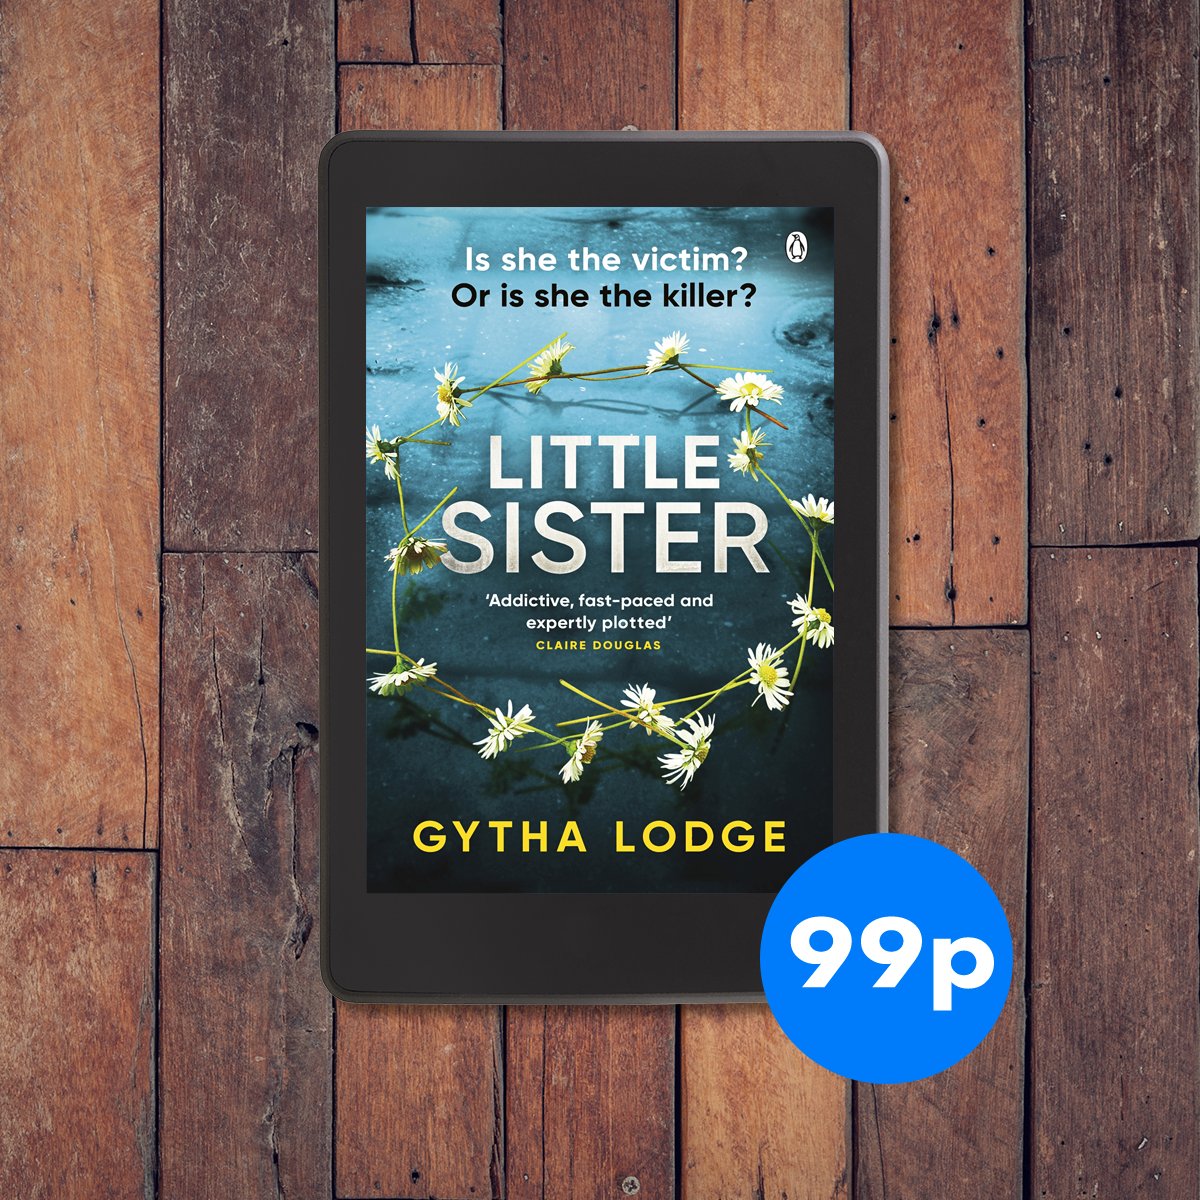 Victim, witness... or killer? It's up to Detective Jonah Sheens to uncover the truth. This week's eBook deal is #LittleSister by @thegyth! Get your copy for just 99p: amazon.co.uk/Little-Sister-… #AffiliateLink